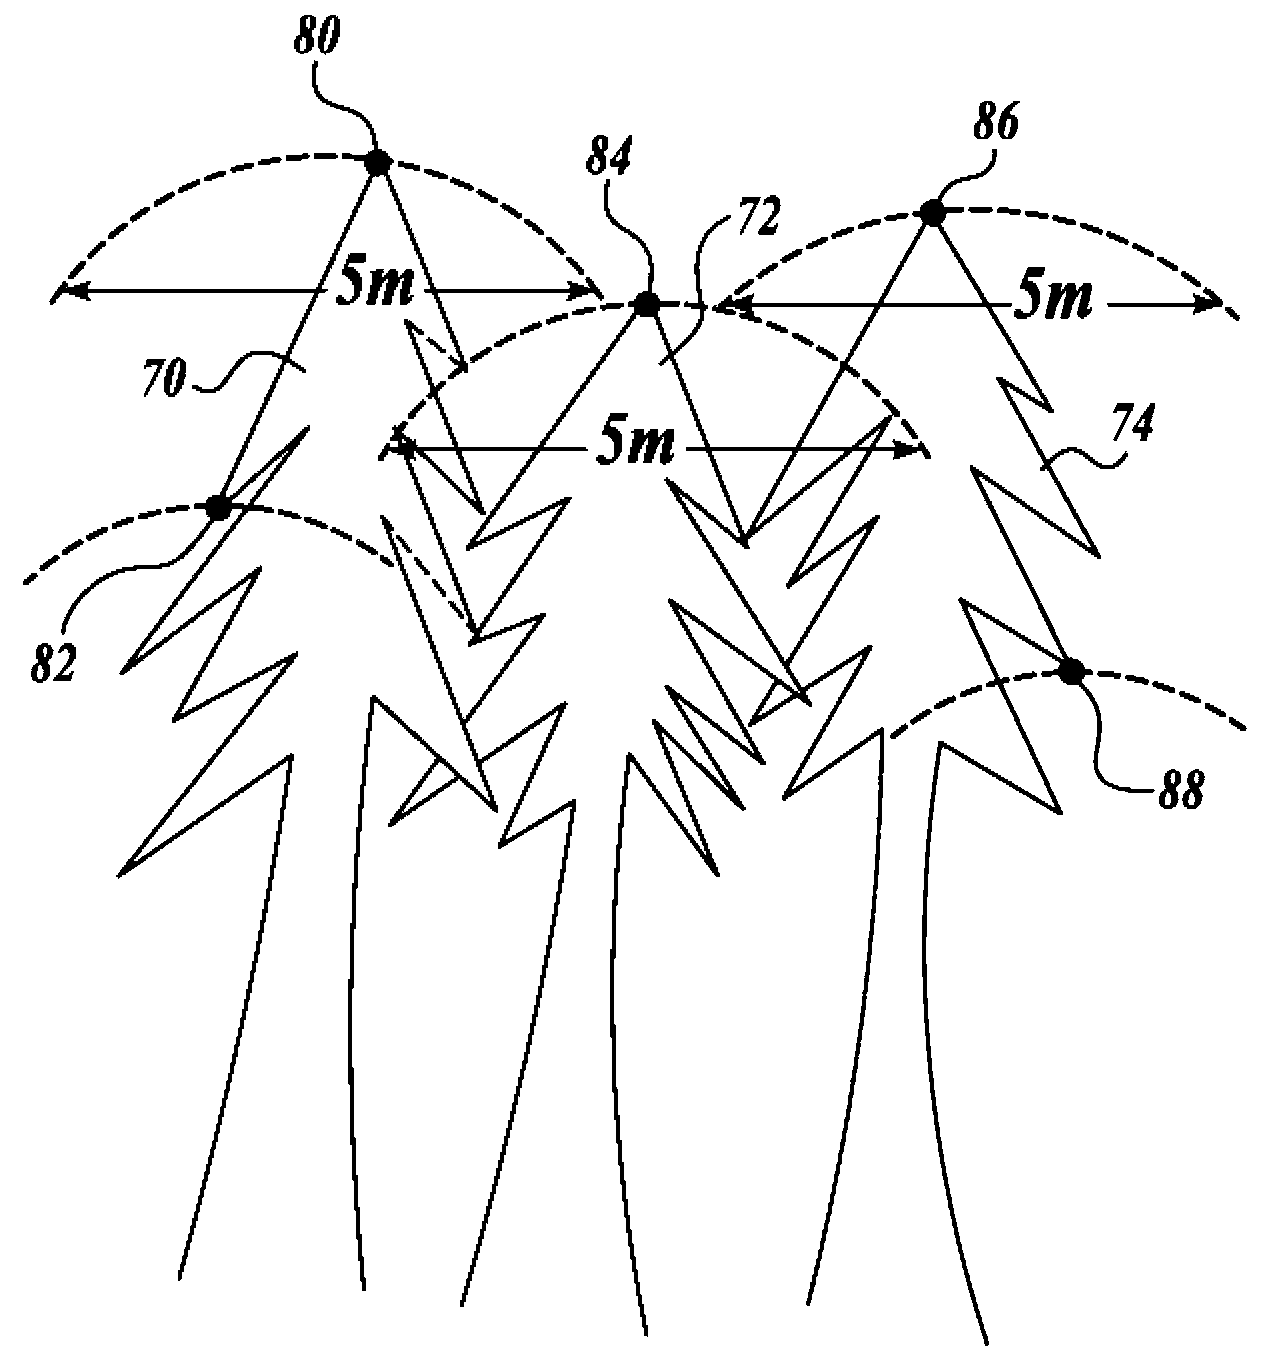 Method and apparatus for for analyzing tree canopies with LiDAR data